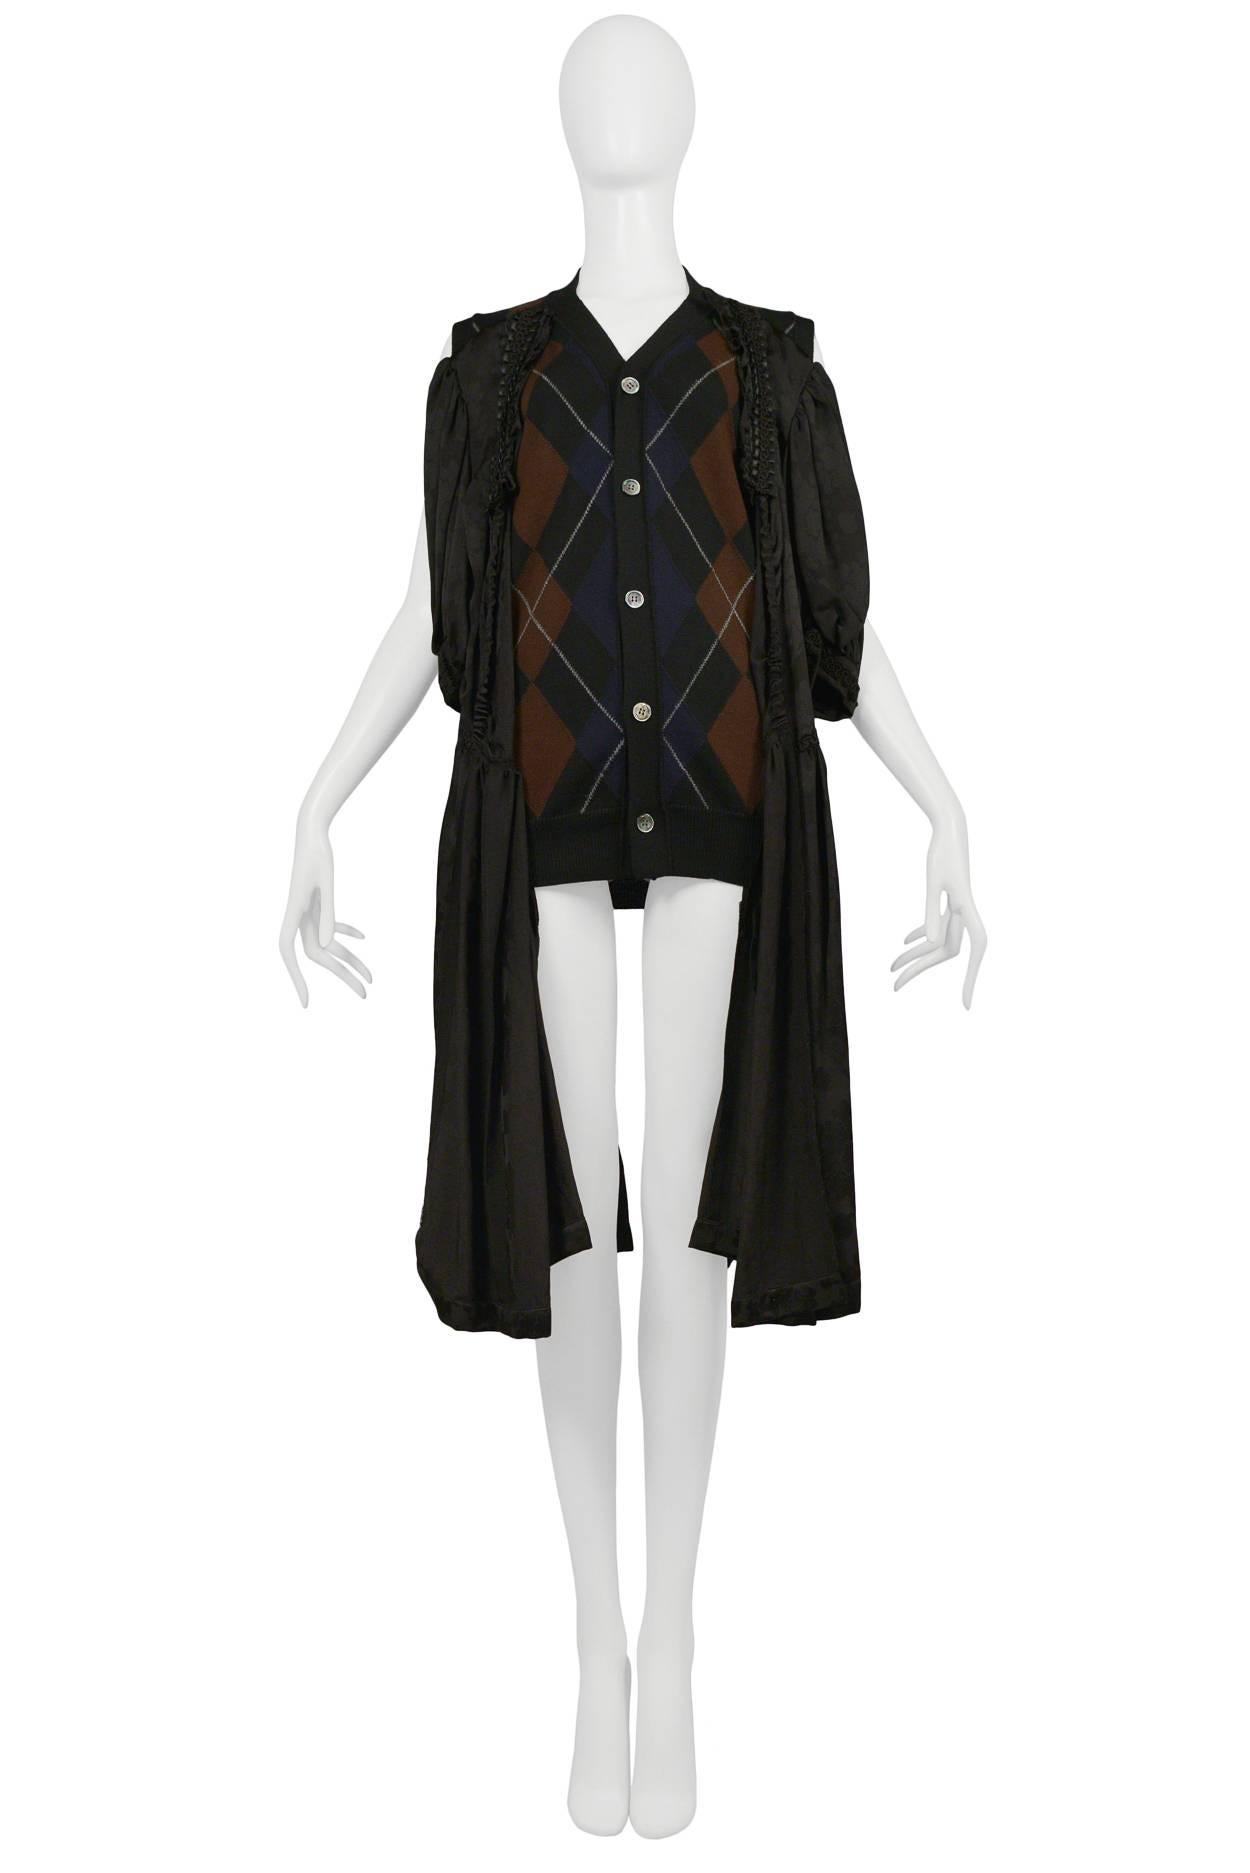 Comme des Garcons navy and brown argyle button front cardigan sweater with attached black satin fancy dress. Collection AW 2006.